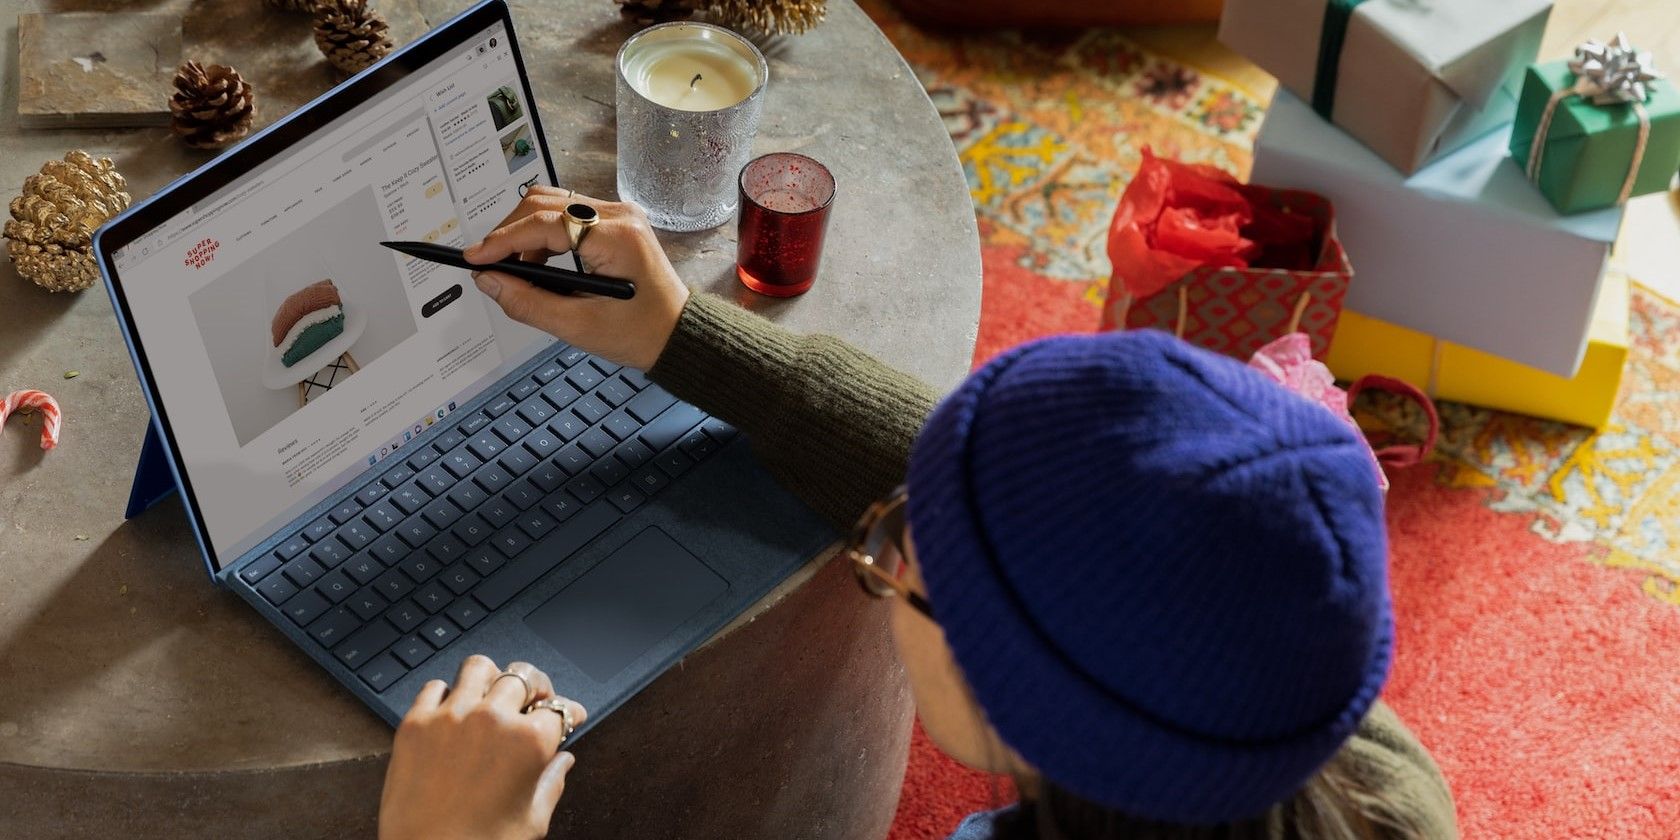 How to Gift Windows Apps on Christmas via the Microsoft Store